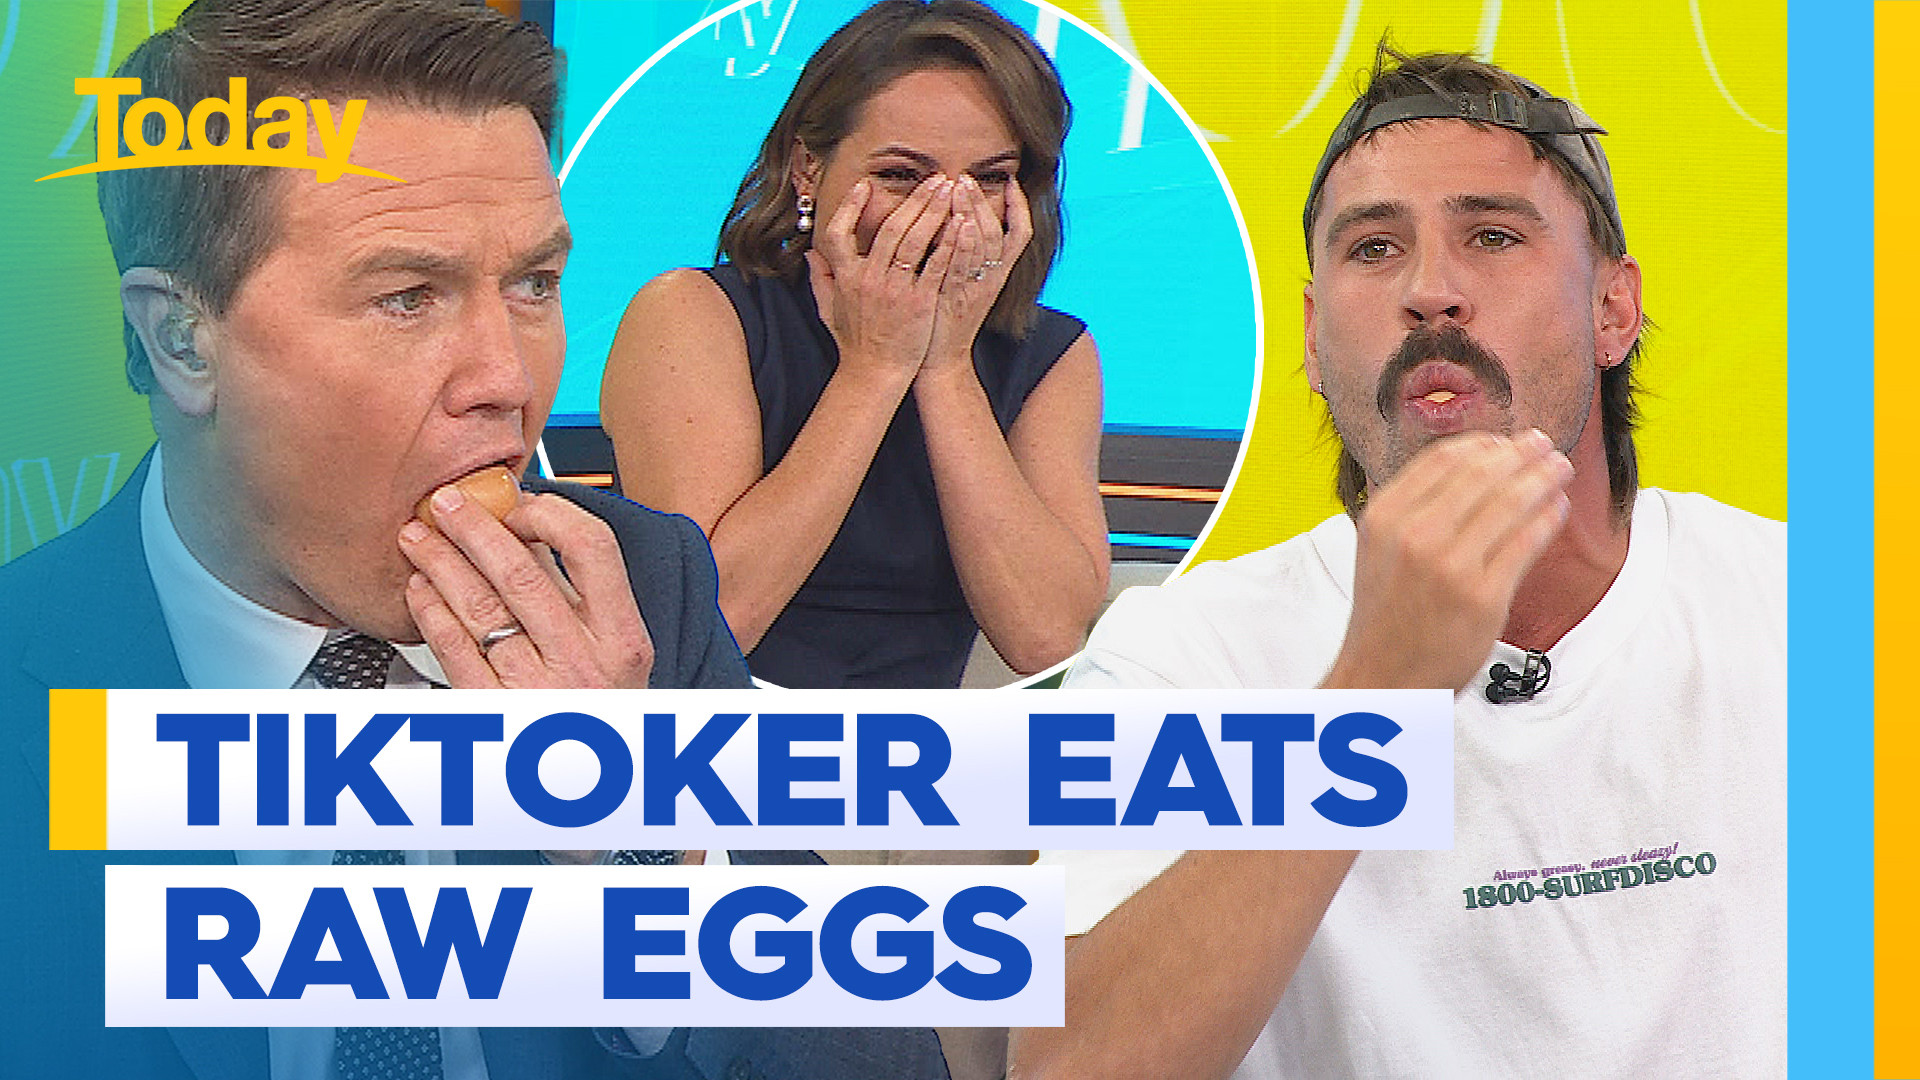 TikToker goes viral for eating raw eggs, shell and all